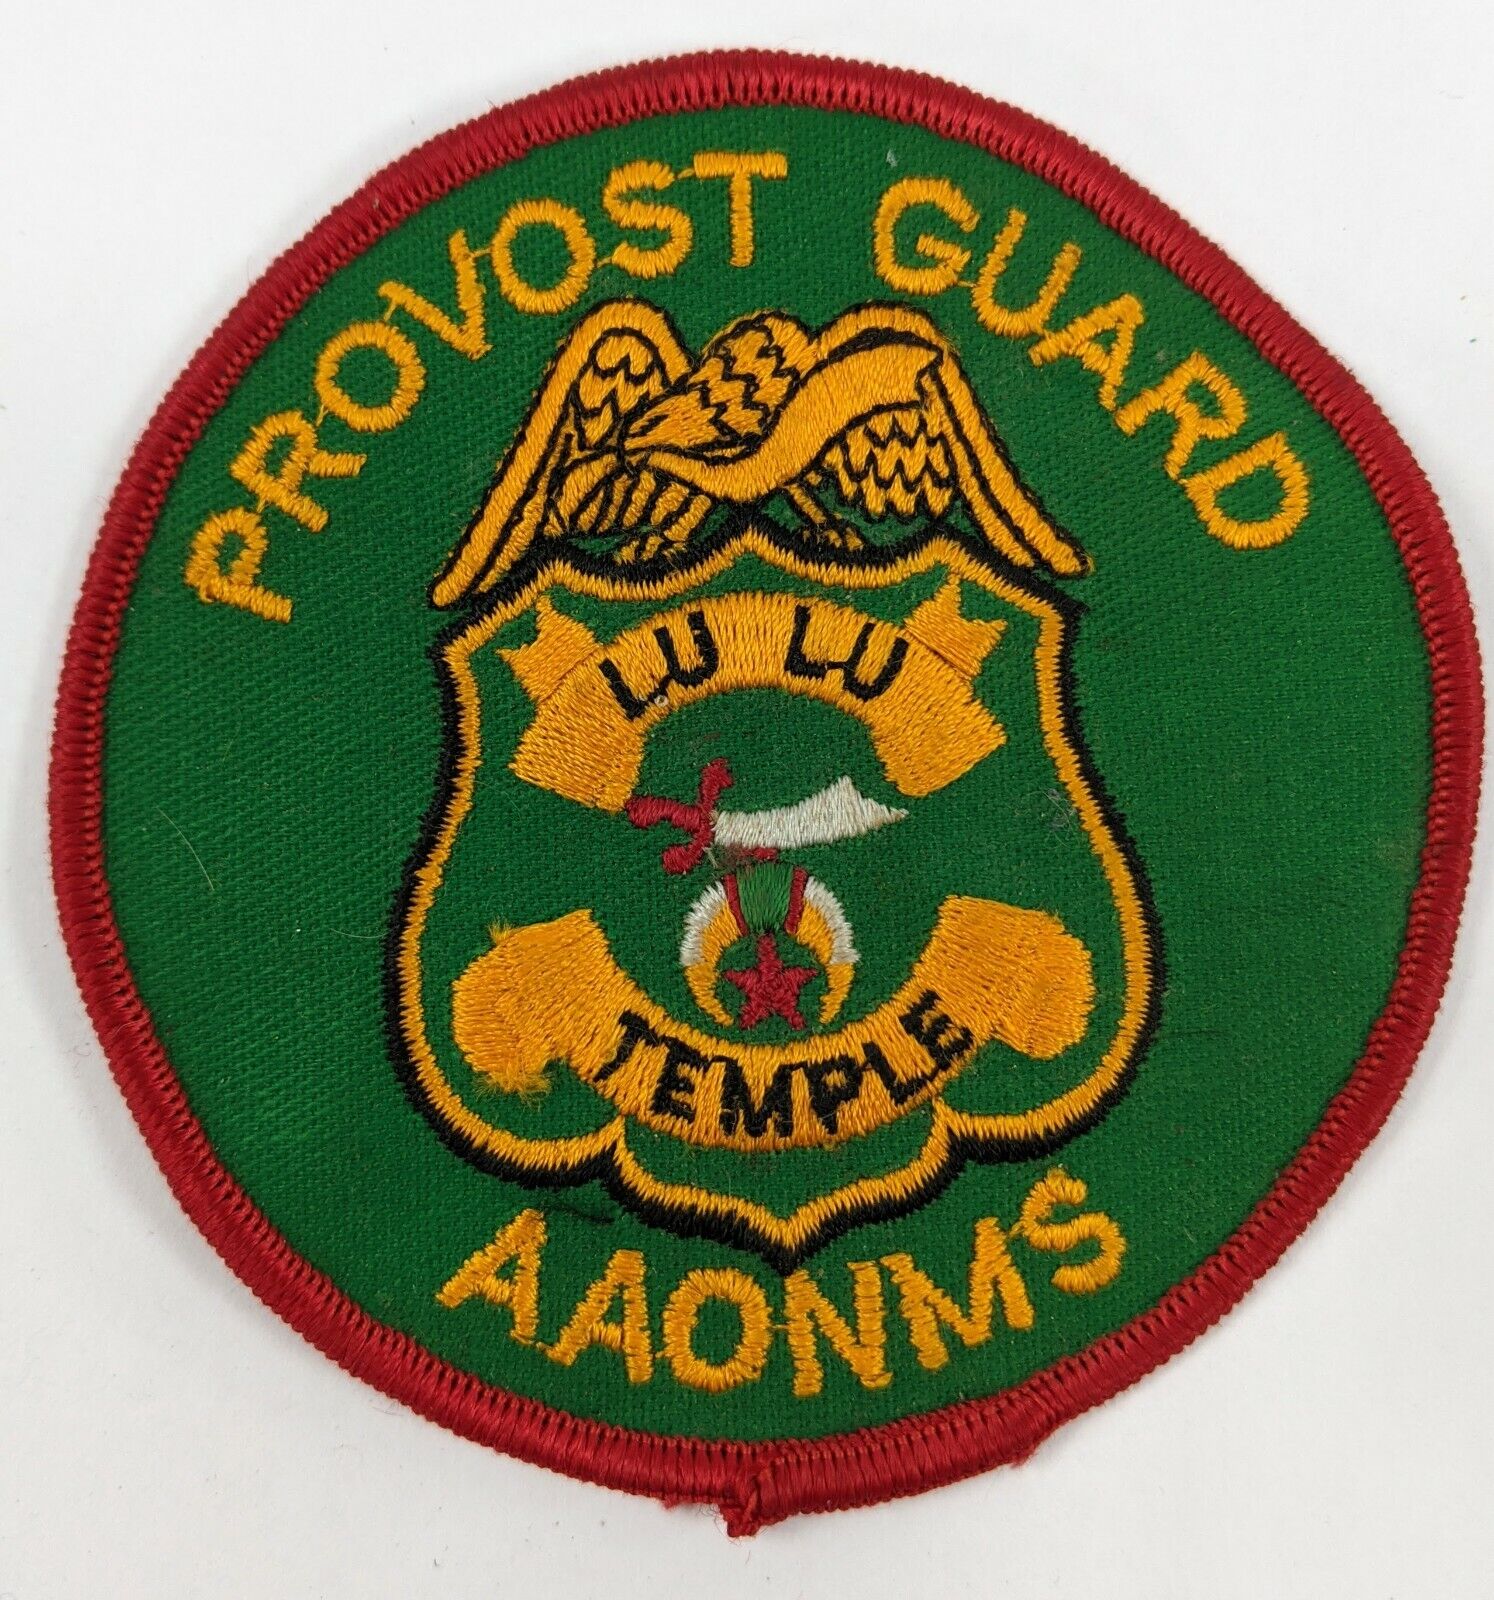 Provost Guard AAONMS Lu Lu Temple Shriners Free Mason Embroidered Patch